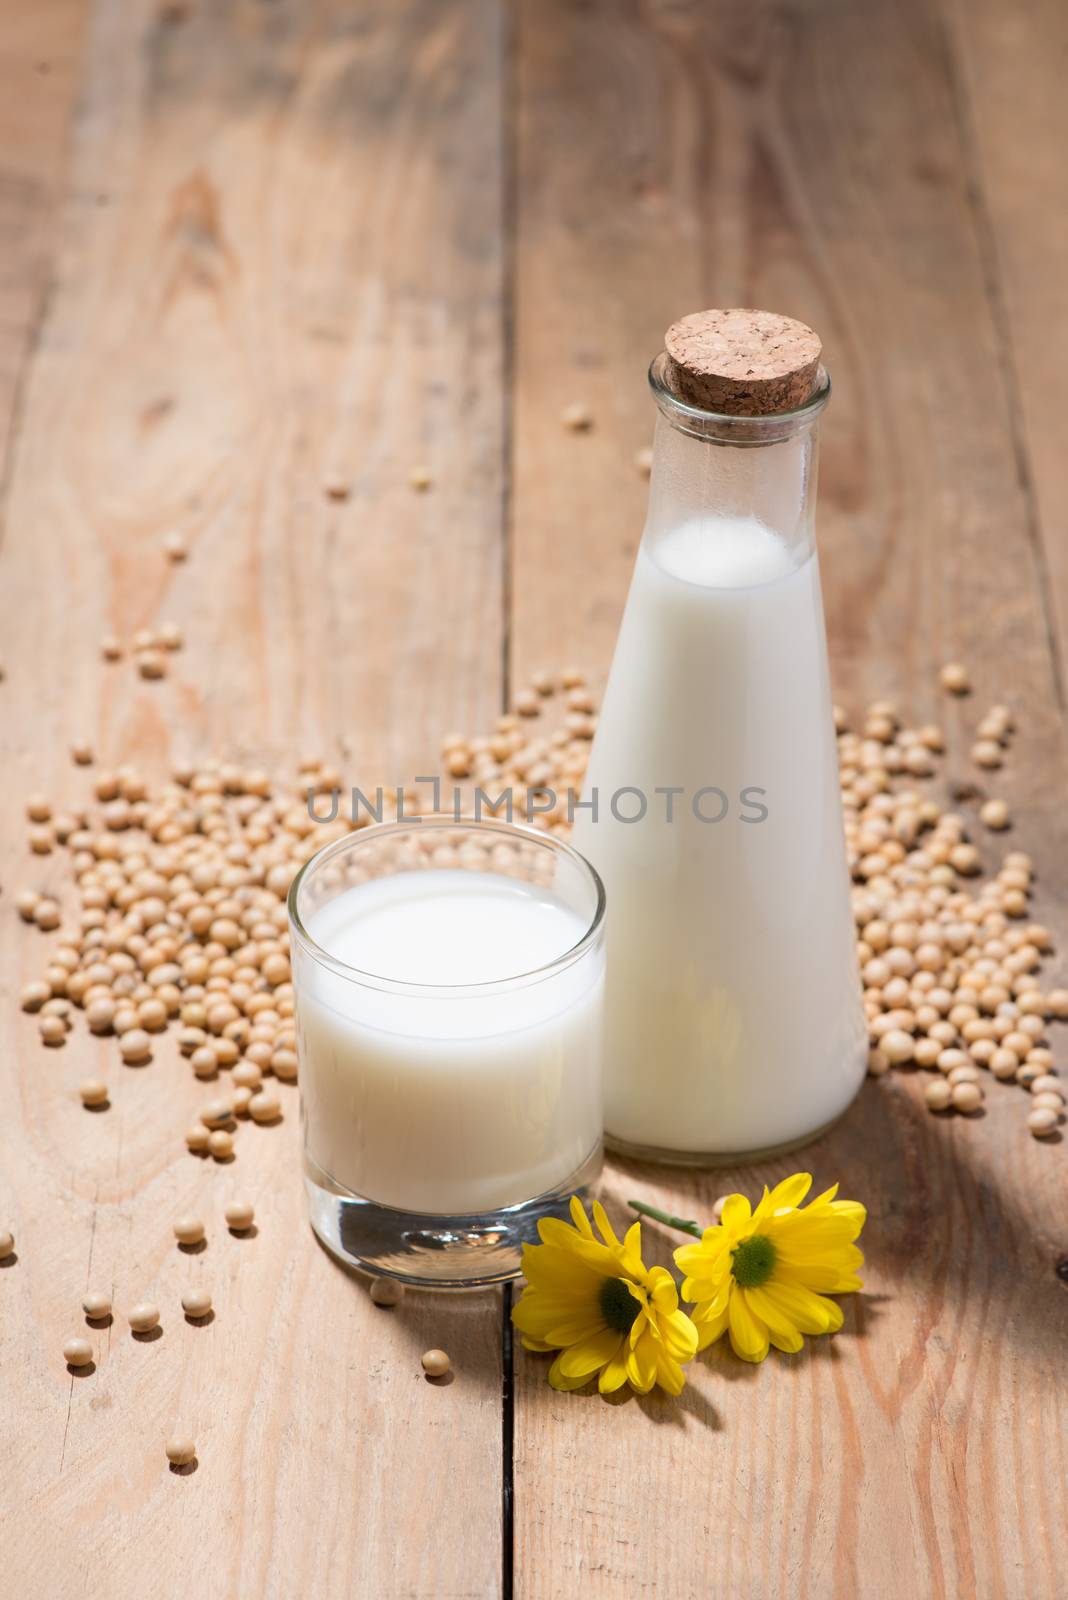 Soy milk or soya milk and soy beans in spoon on wooden table. 